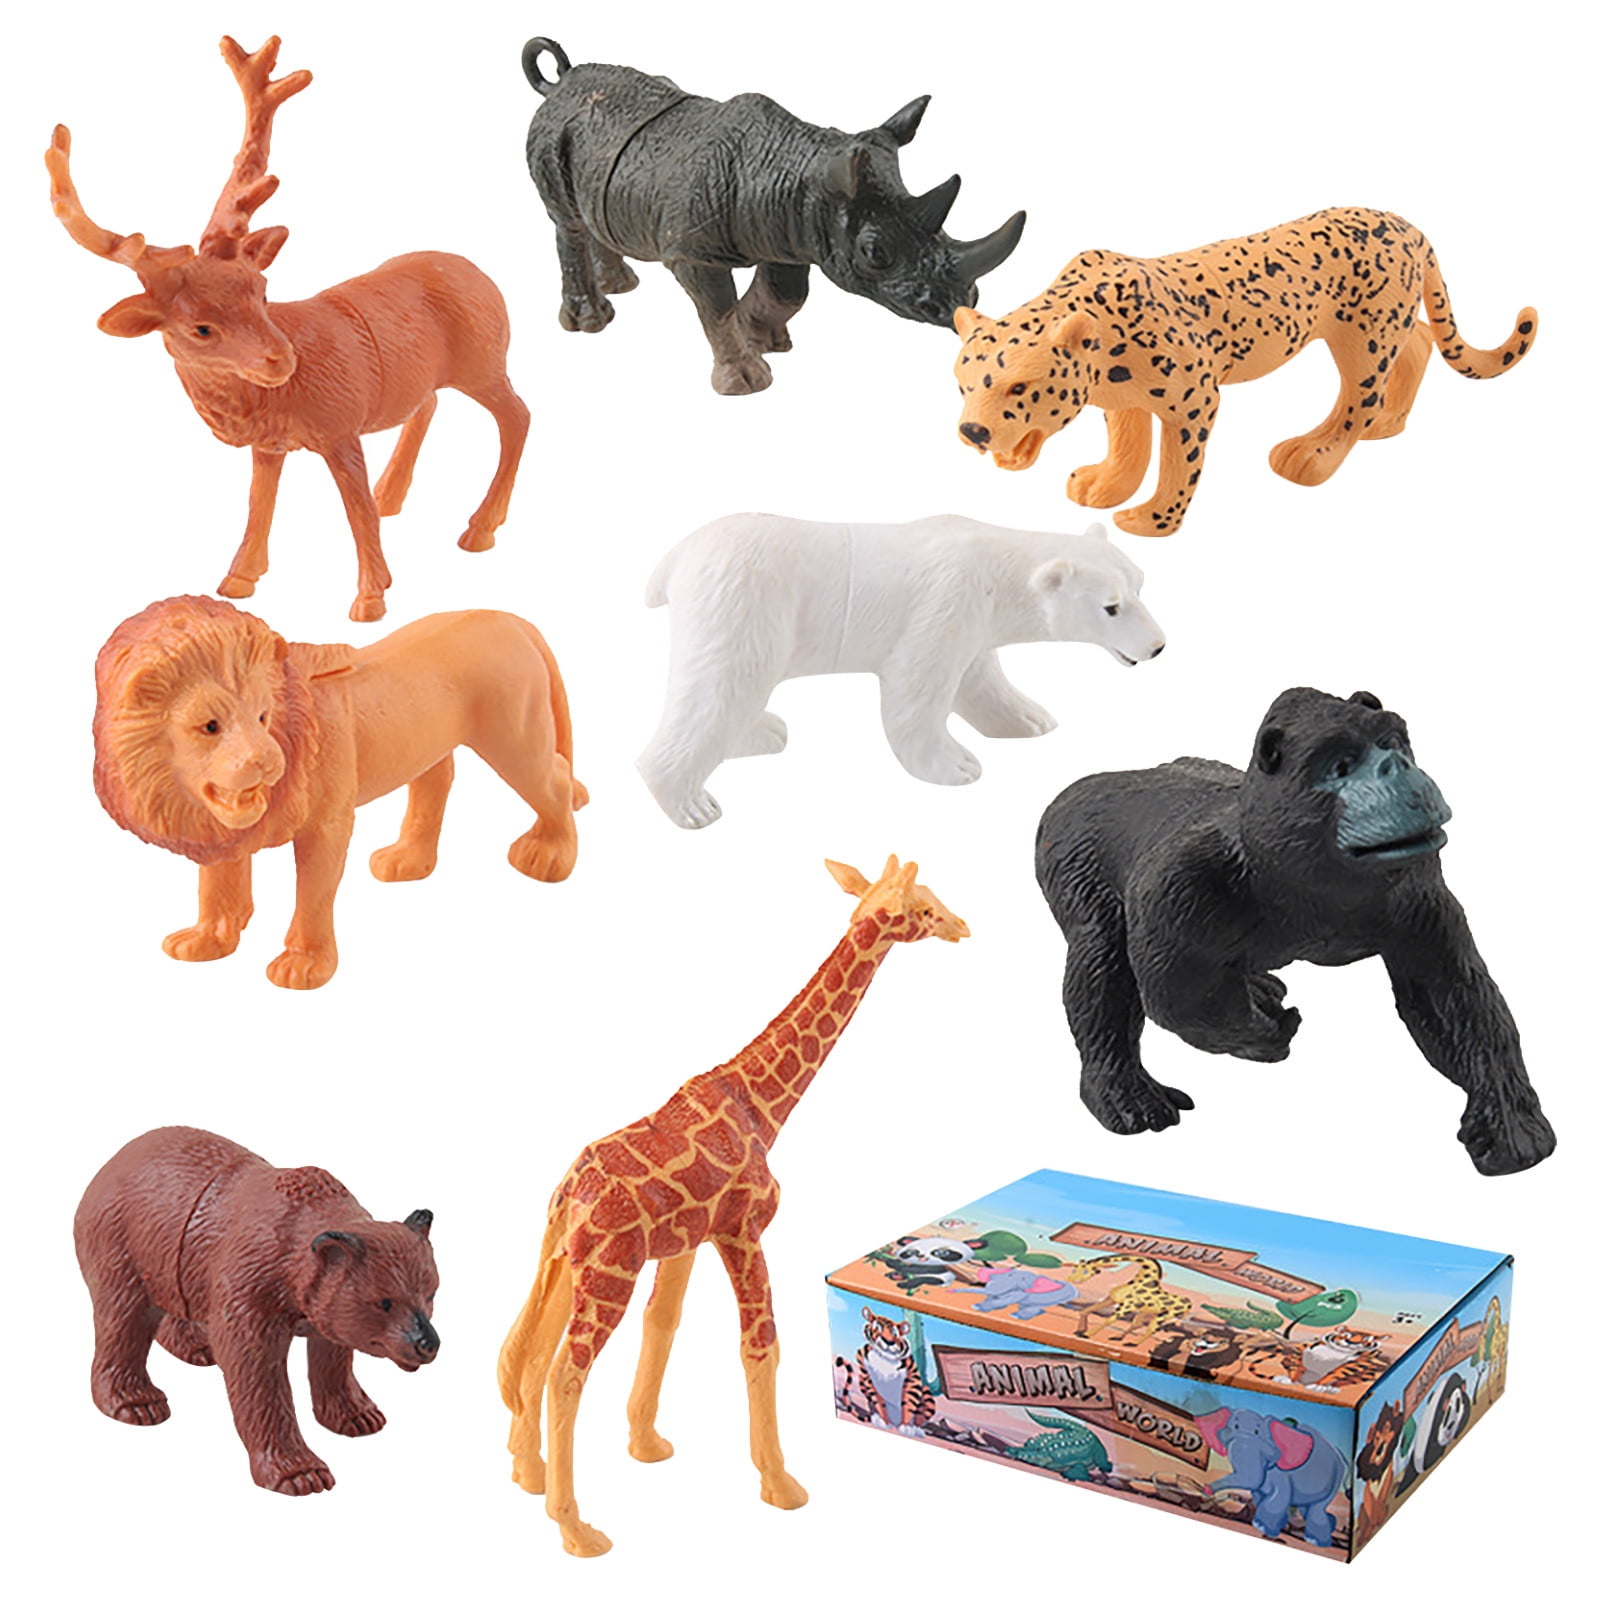 Yoslce Animal Toys Animal Toys Figurines Zoo Pack For Kids Gift Preschool  Educational 8 Animals Set Paperplay Kitchen Accessories 